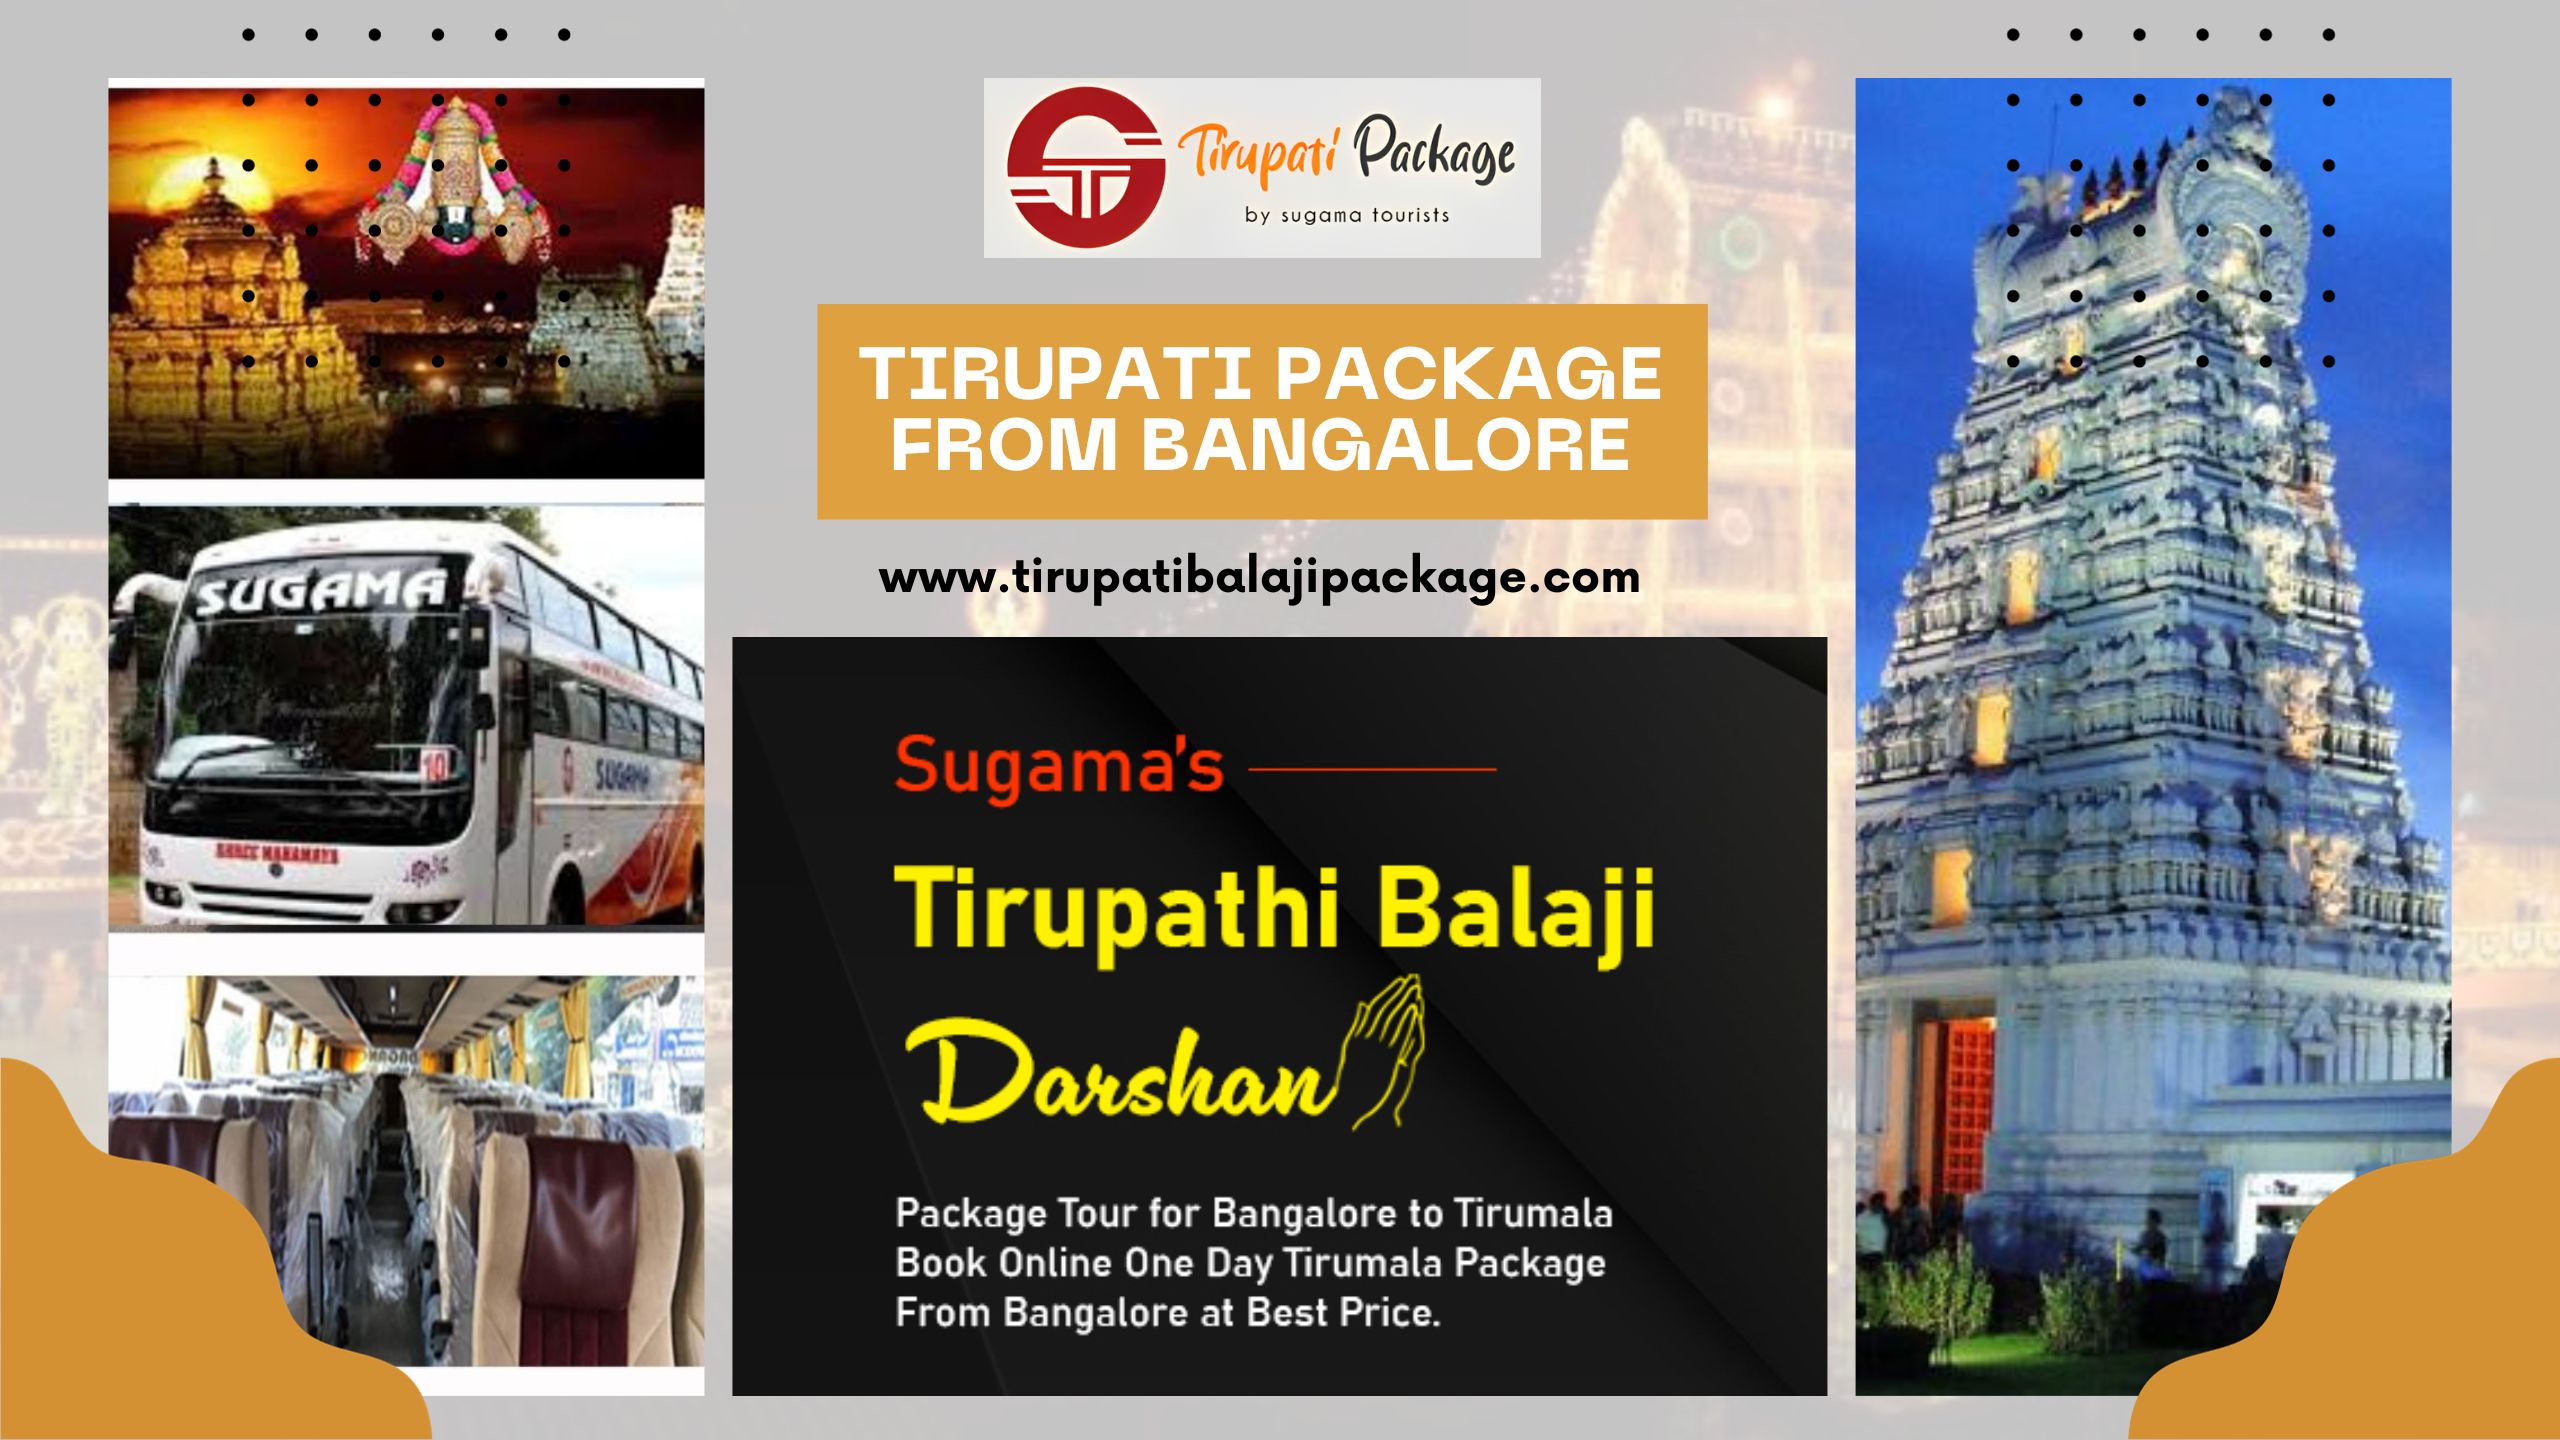 Tirupati Package From Bangalore: An Unforgettable Experience